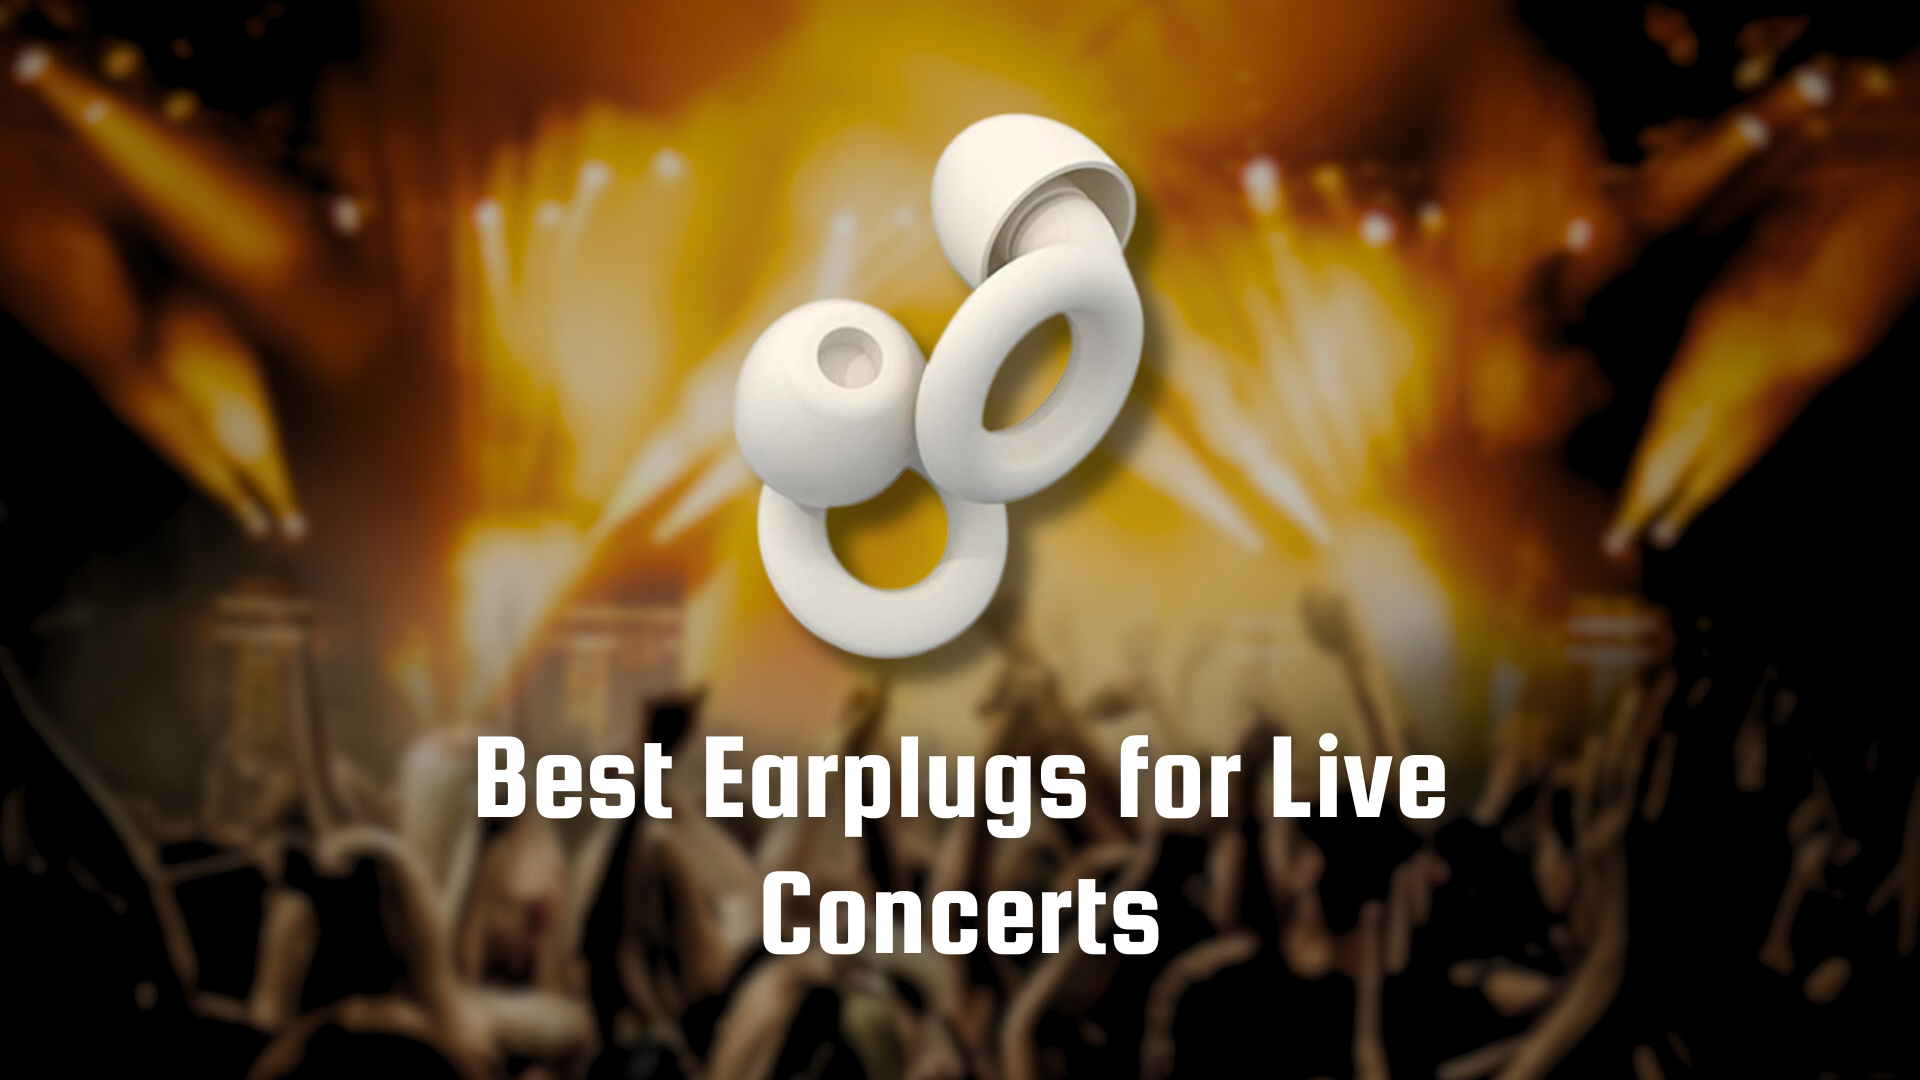 Best Earplugs for Live Concerts